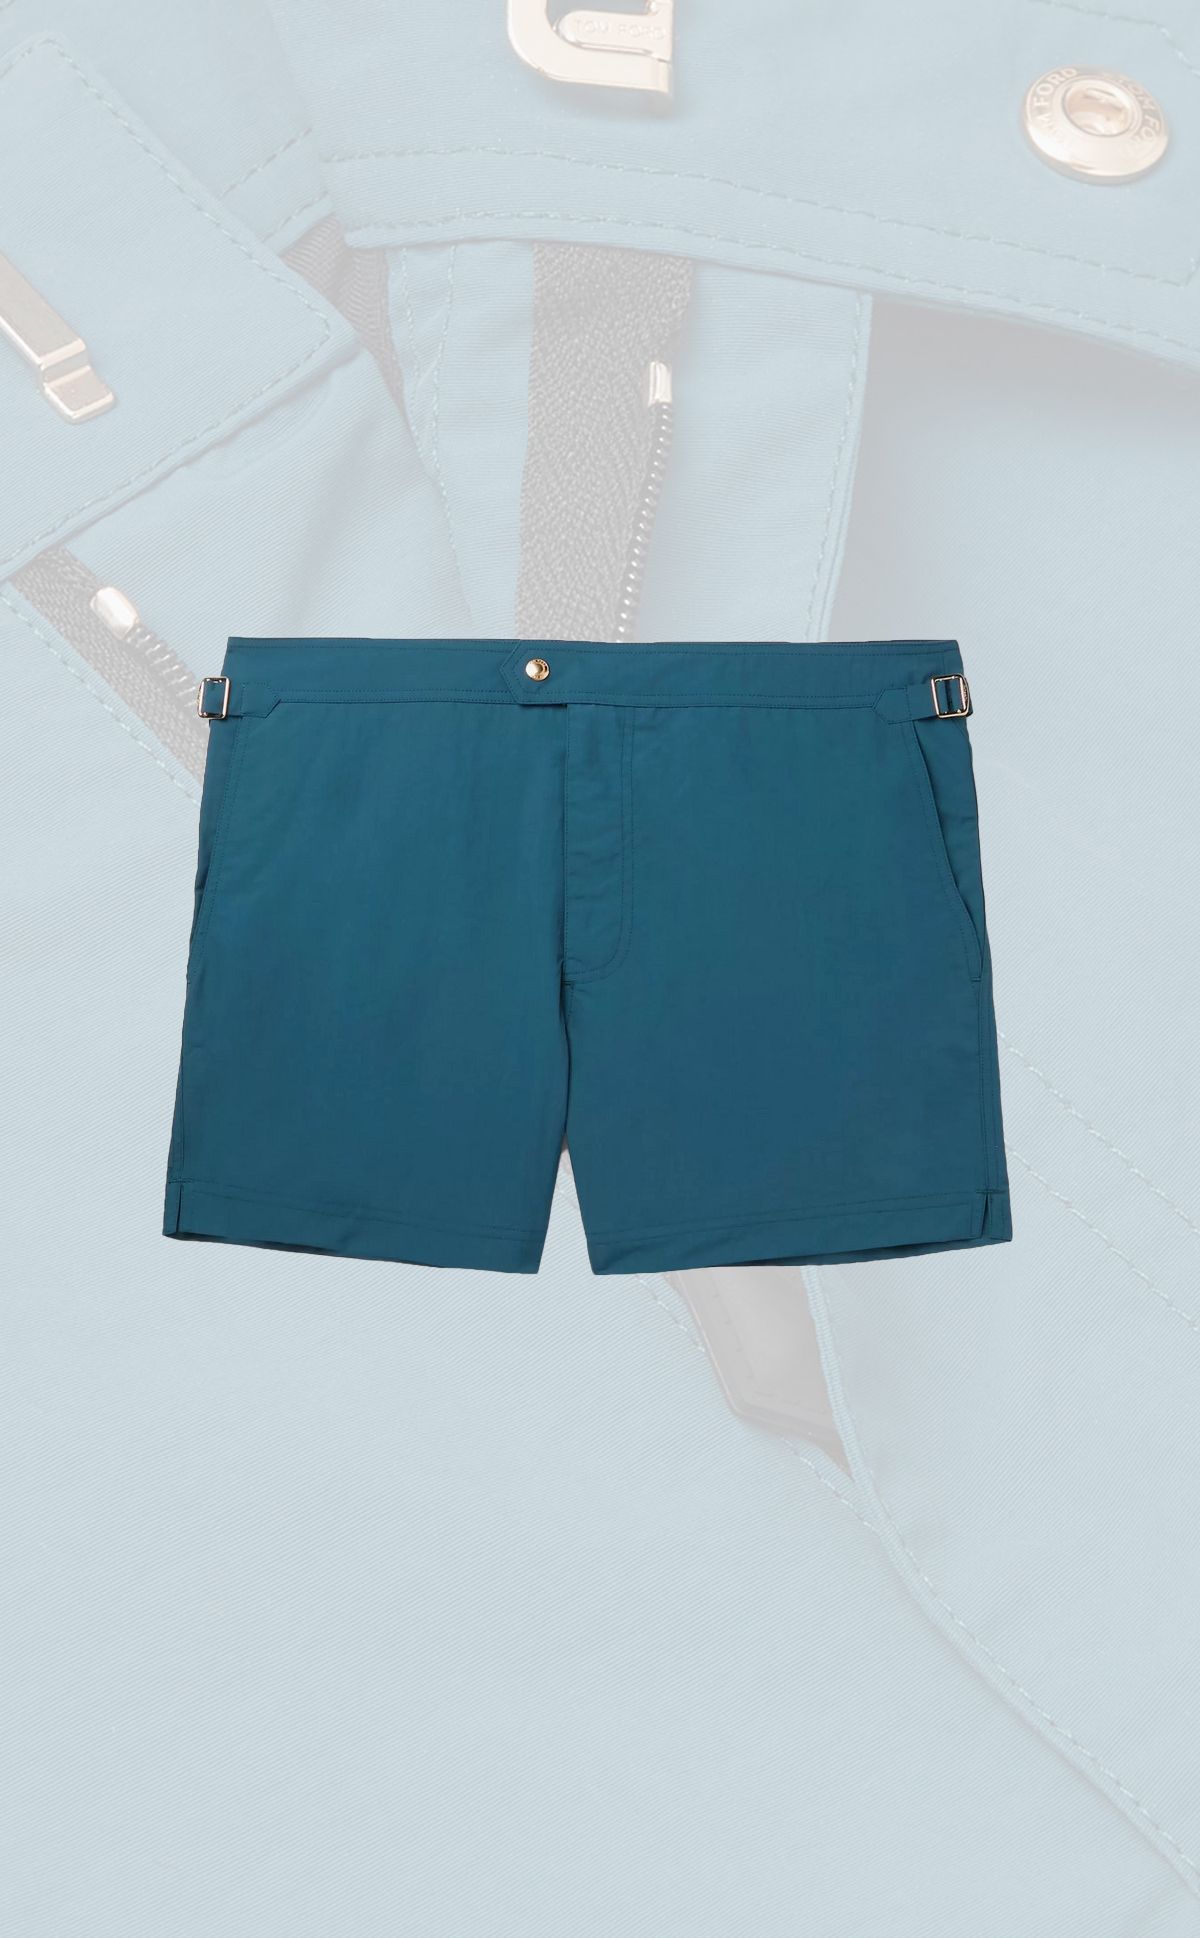 Splash Out: Six Of This Summer’s Best Swim Shorts | The Journal | MR PORTER